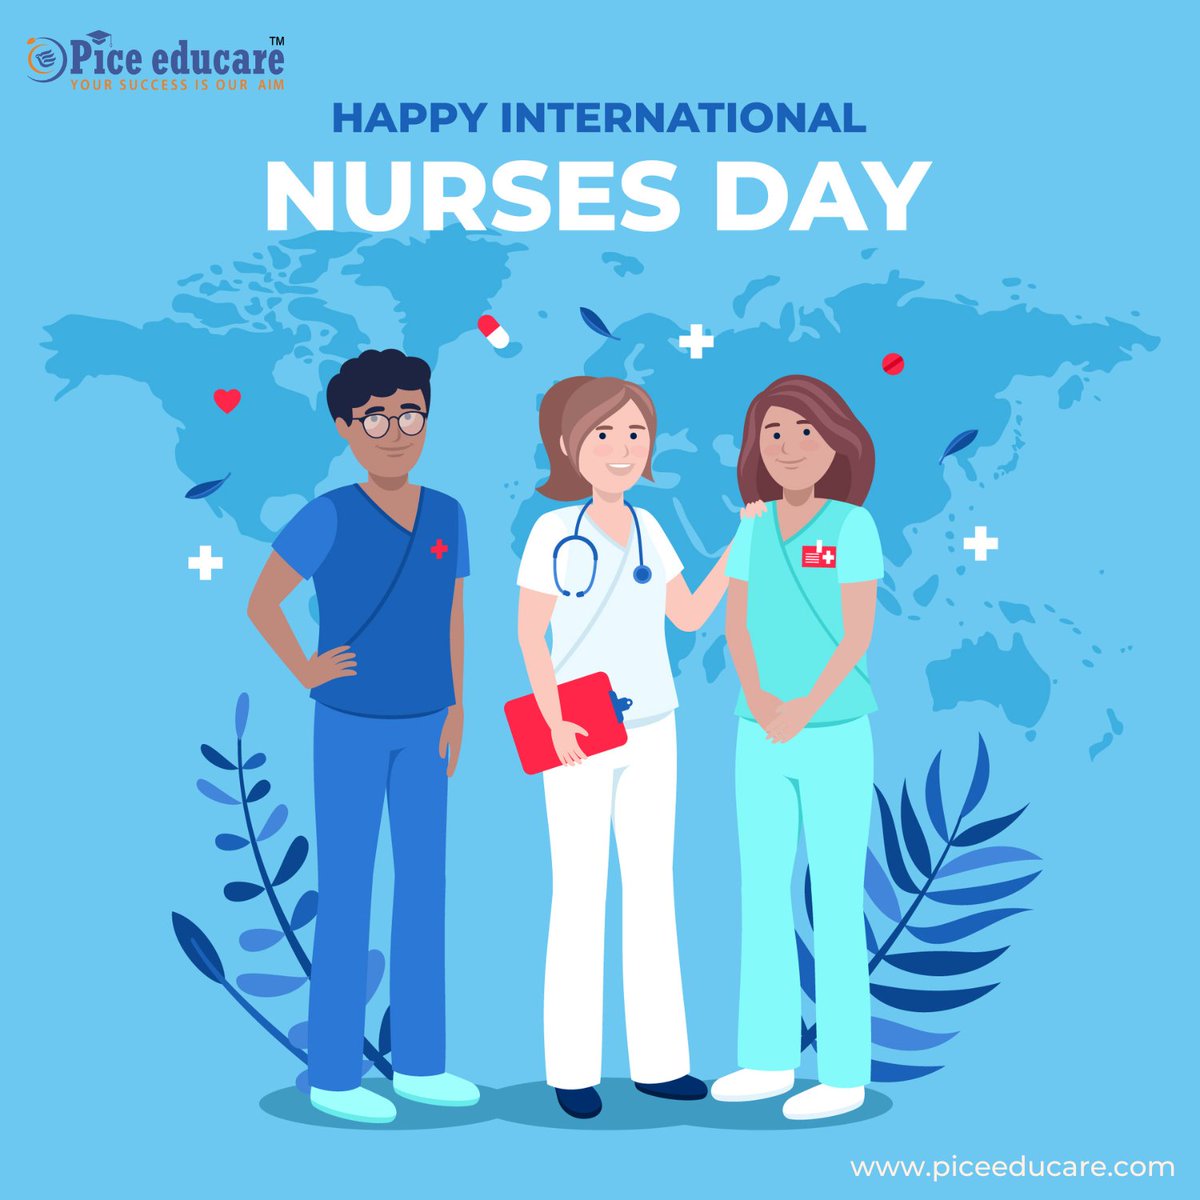 Happy International Nurses Day Happy Nurse Day to all the nurses out there who put their own comfort and lives at risk to provide care for patients. #nursesday #happyinternationalnursesday #happynursesday #piceducare